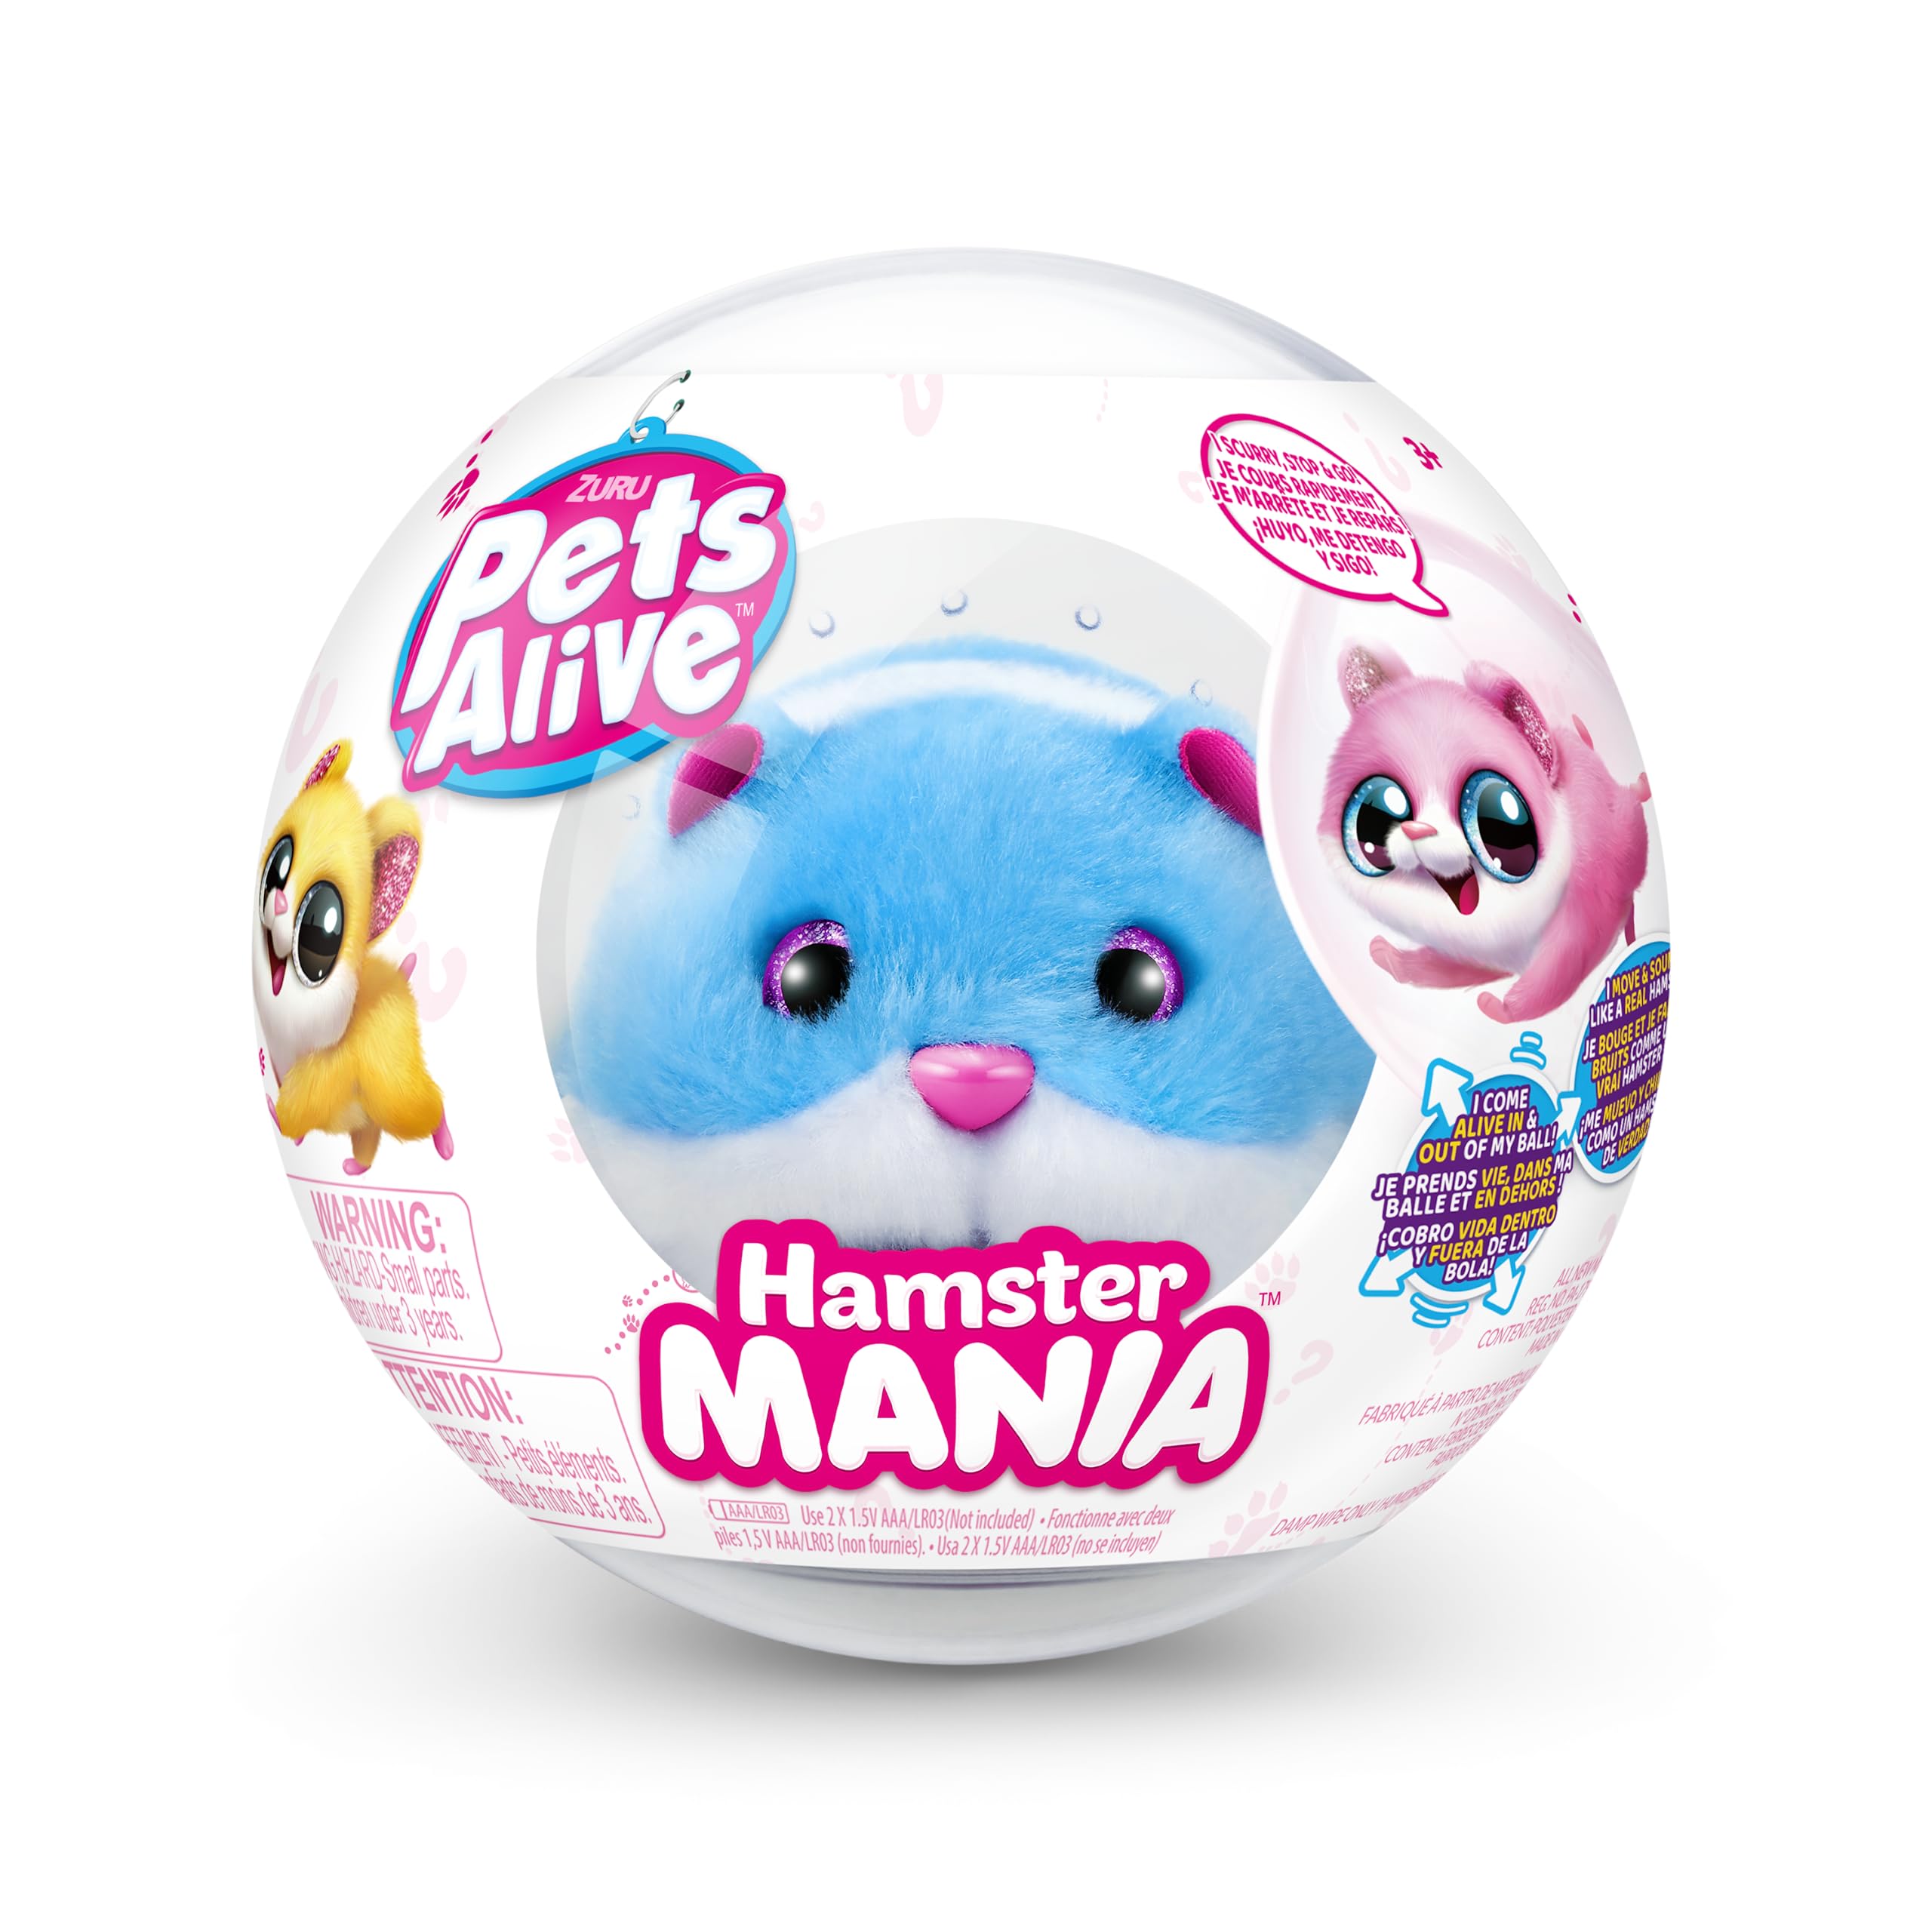 Pets Alive Hamstermania (Blue) by ZURU Hamster, Electronic Pet, 20+ Sounds Interactive, Hamster Ball Toy for Girls and Children